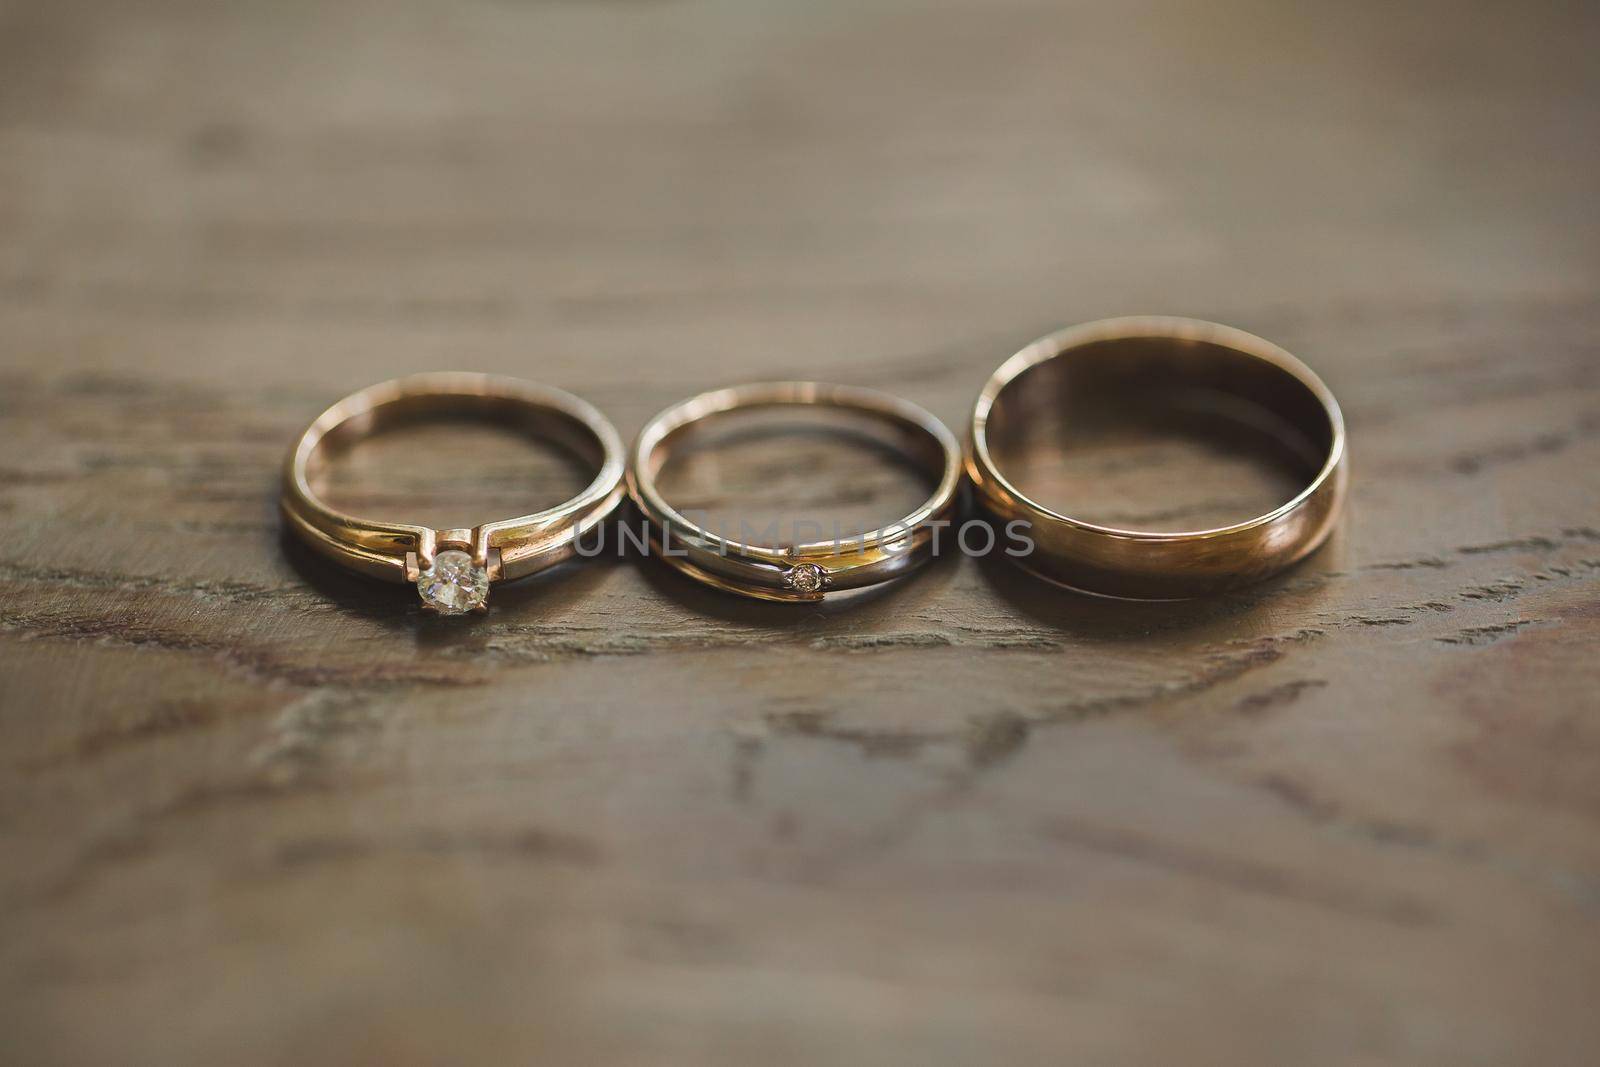 Wedding rings on a wooden texture close-up by StudioPeace